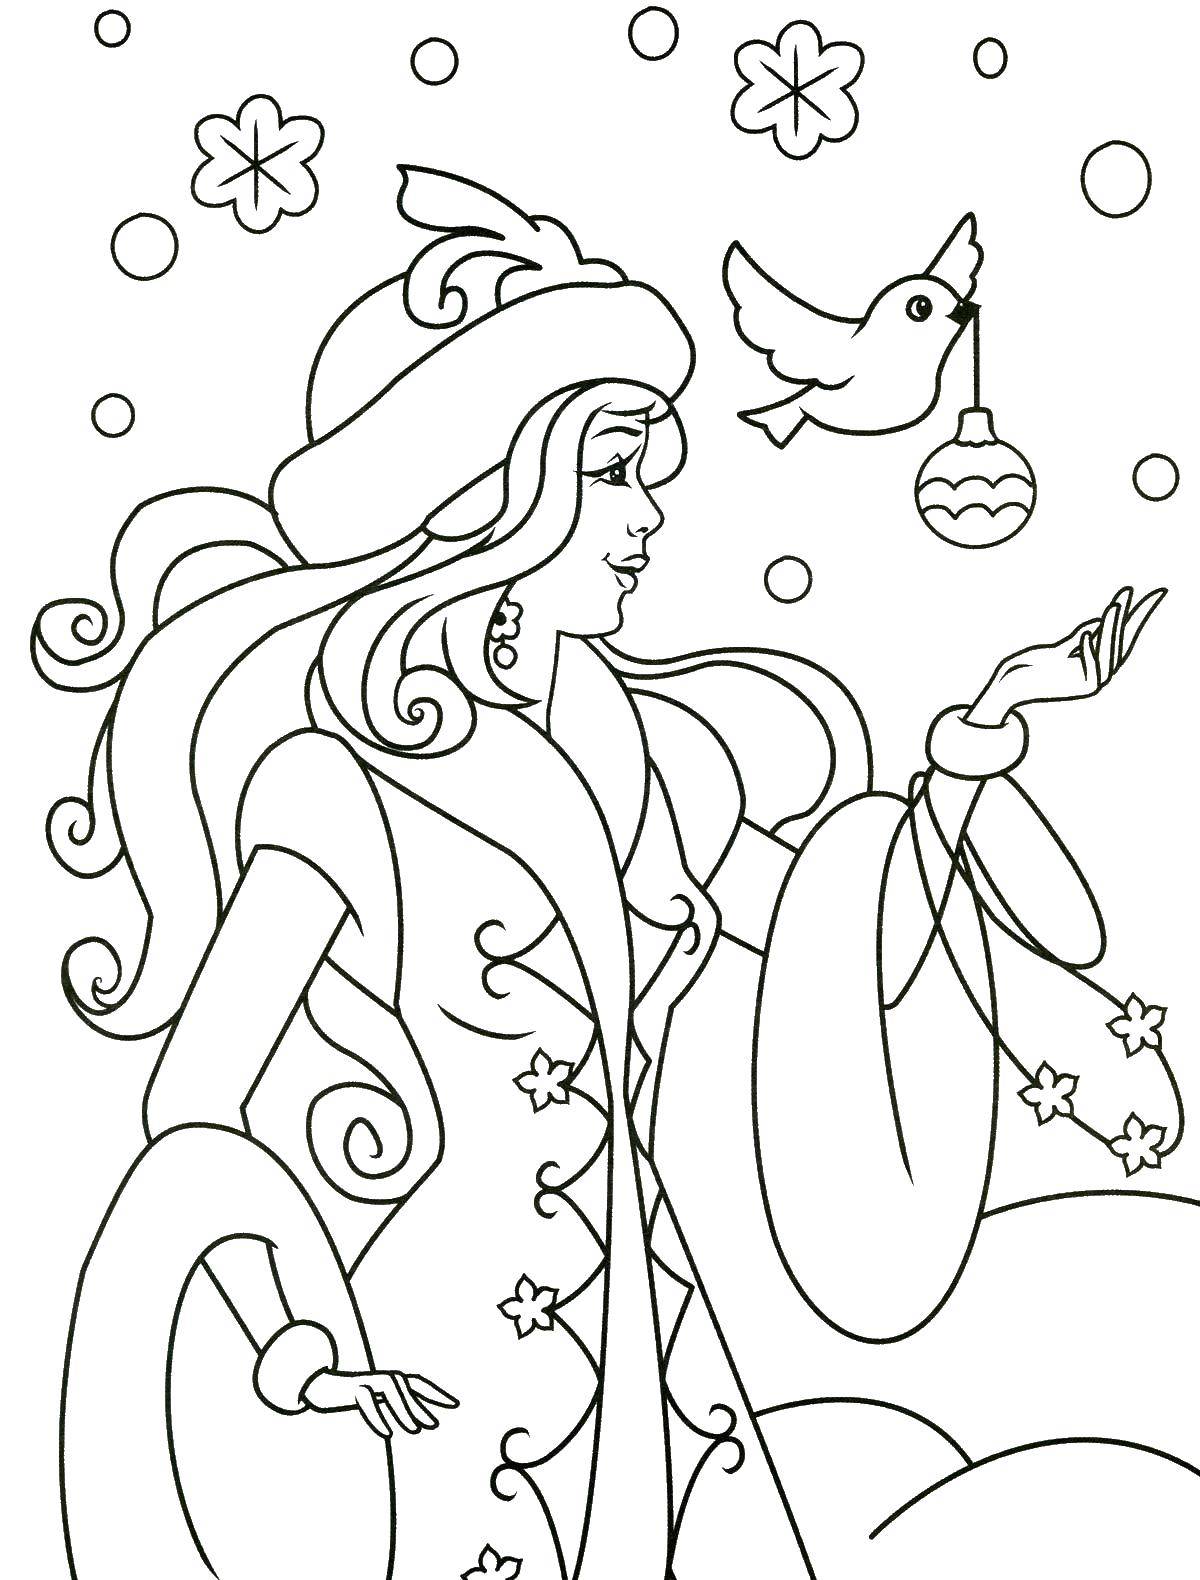 Coloring Maiden and the bird. Category winter. Tags:  the snow maiden, snowflakes, birds.